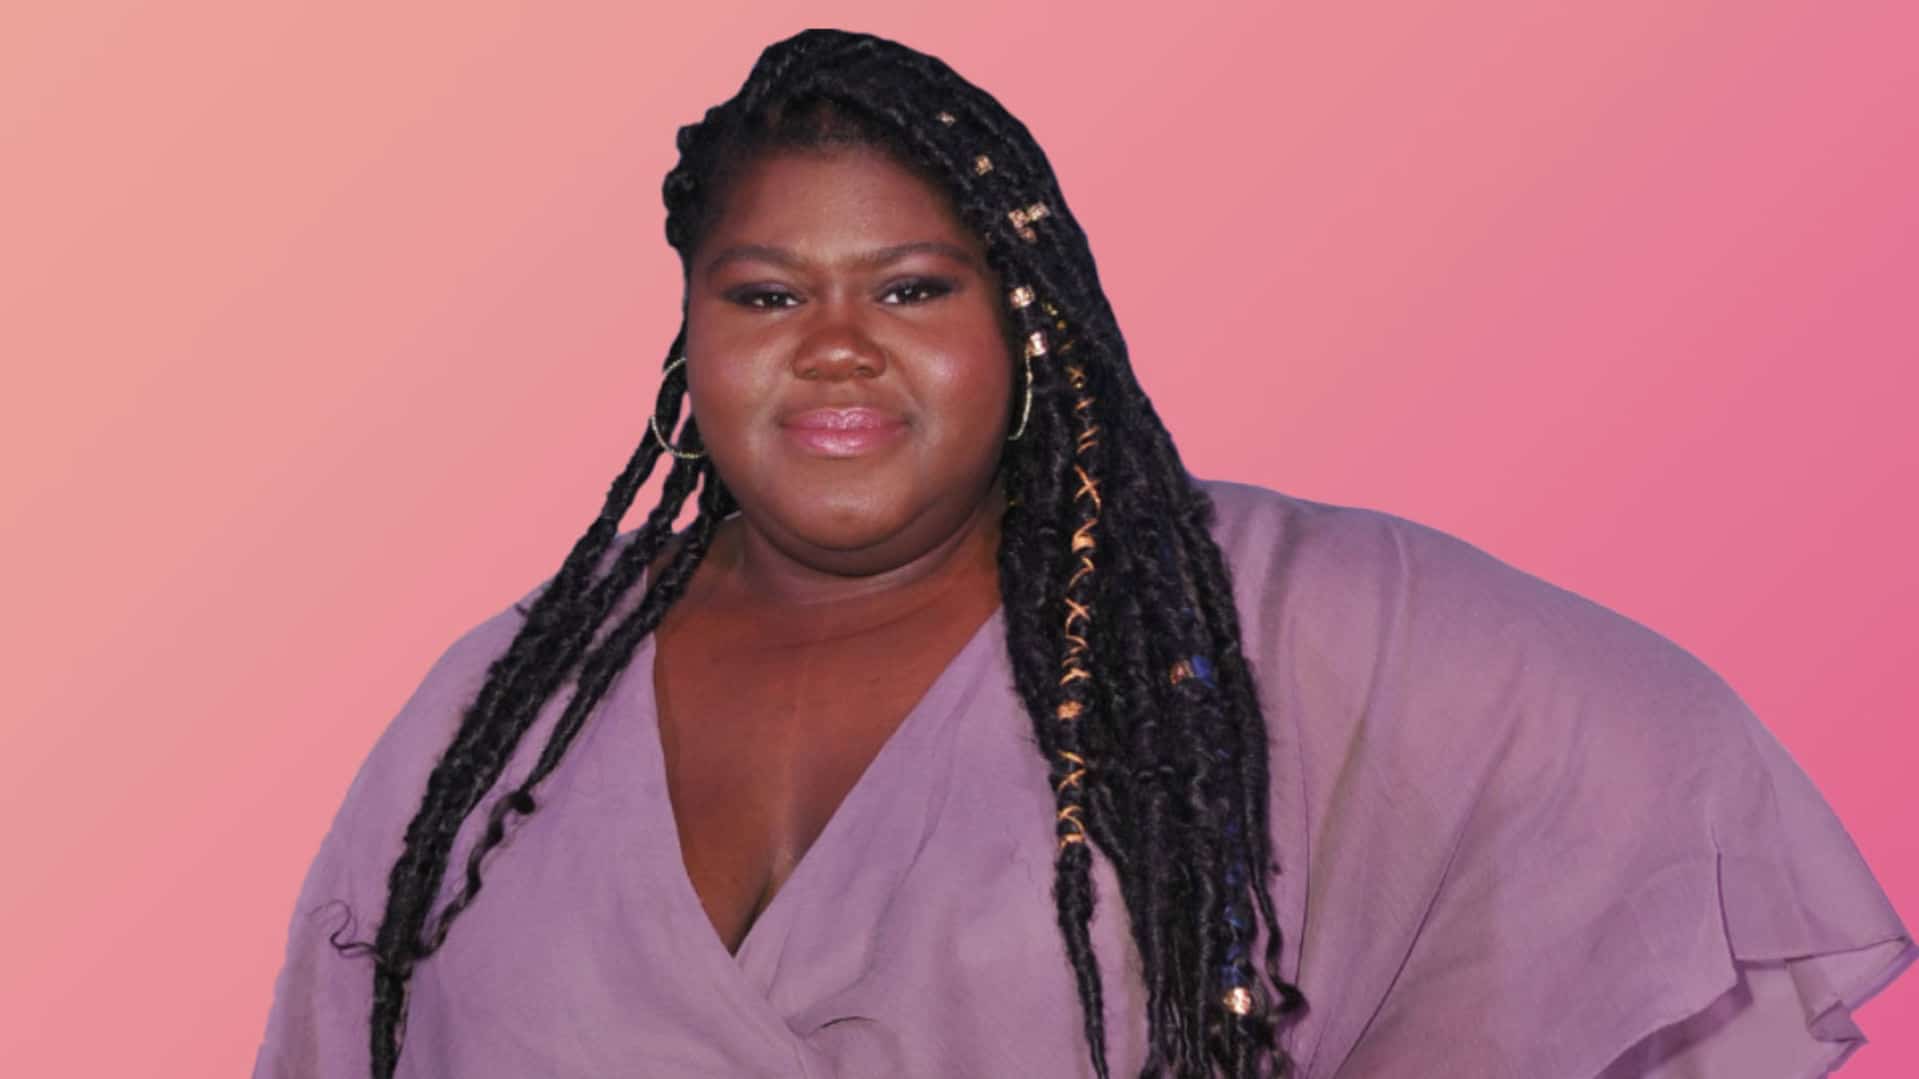 Gabourey Sidibe Shares Why Making Her Directorial Debut As A Black Woman Was A 'Fight' She Was Ready For